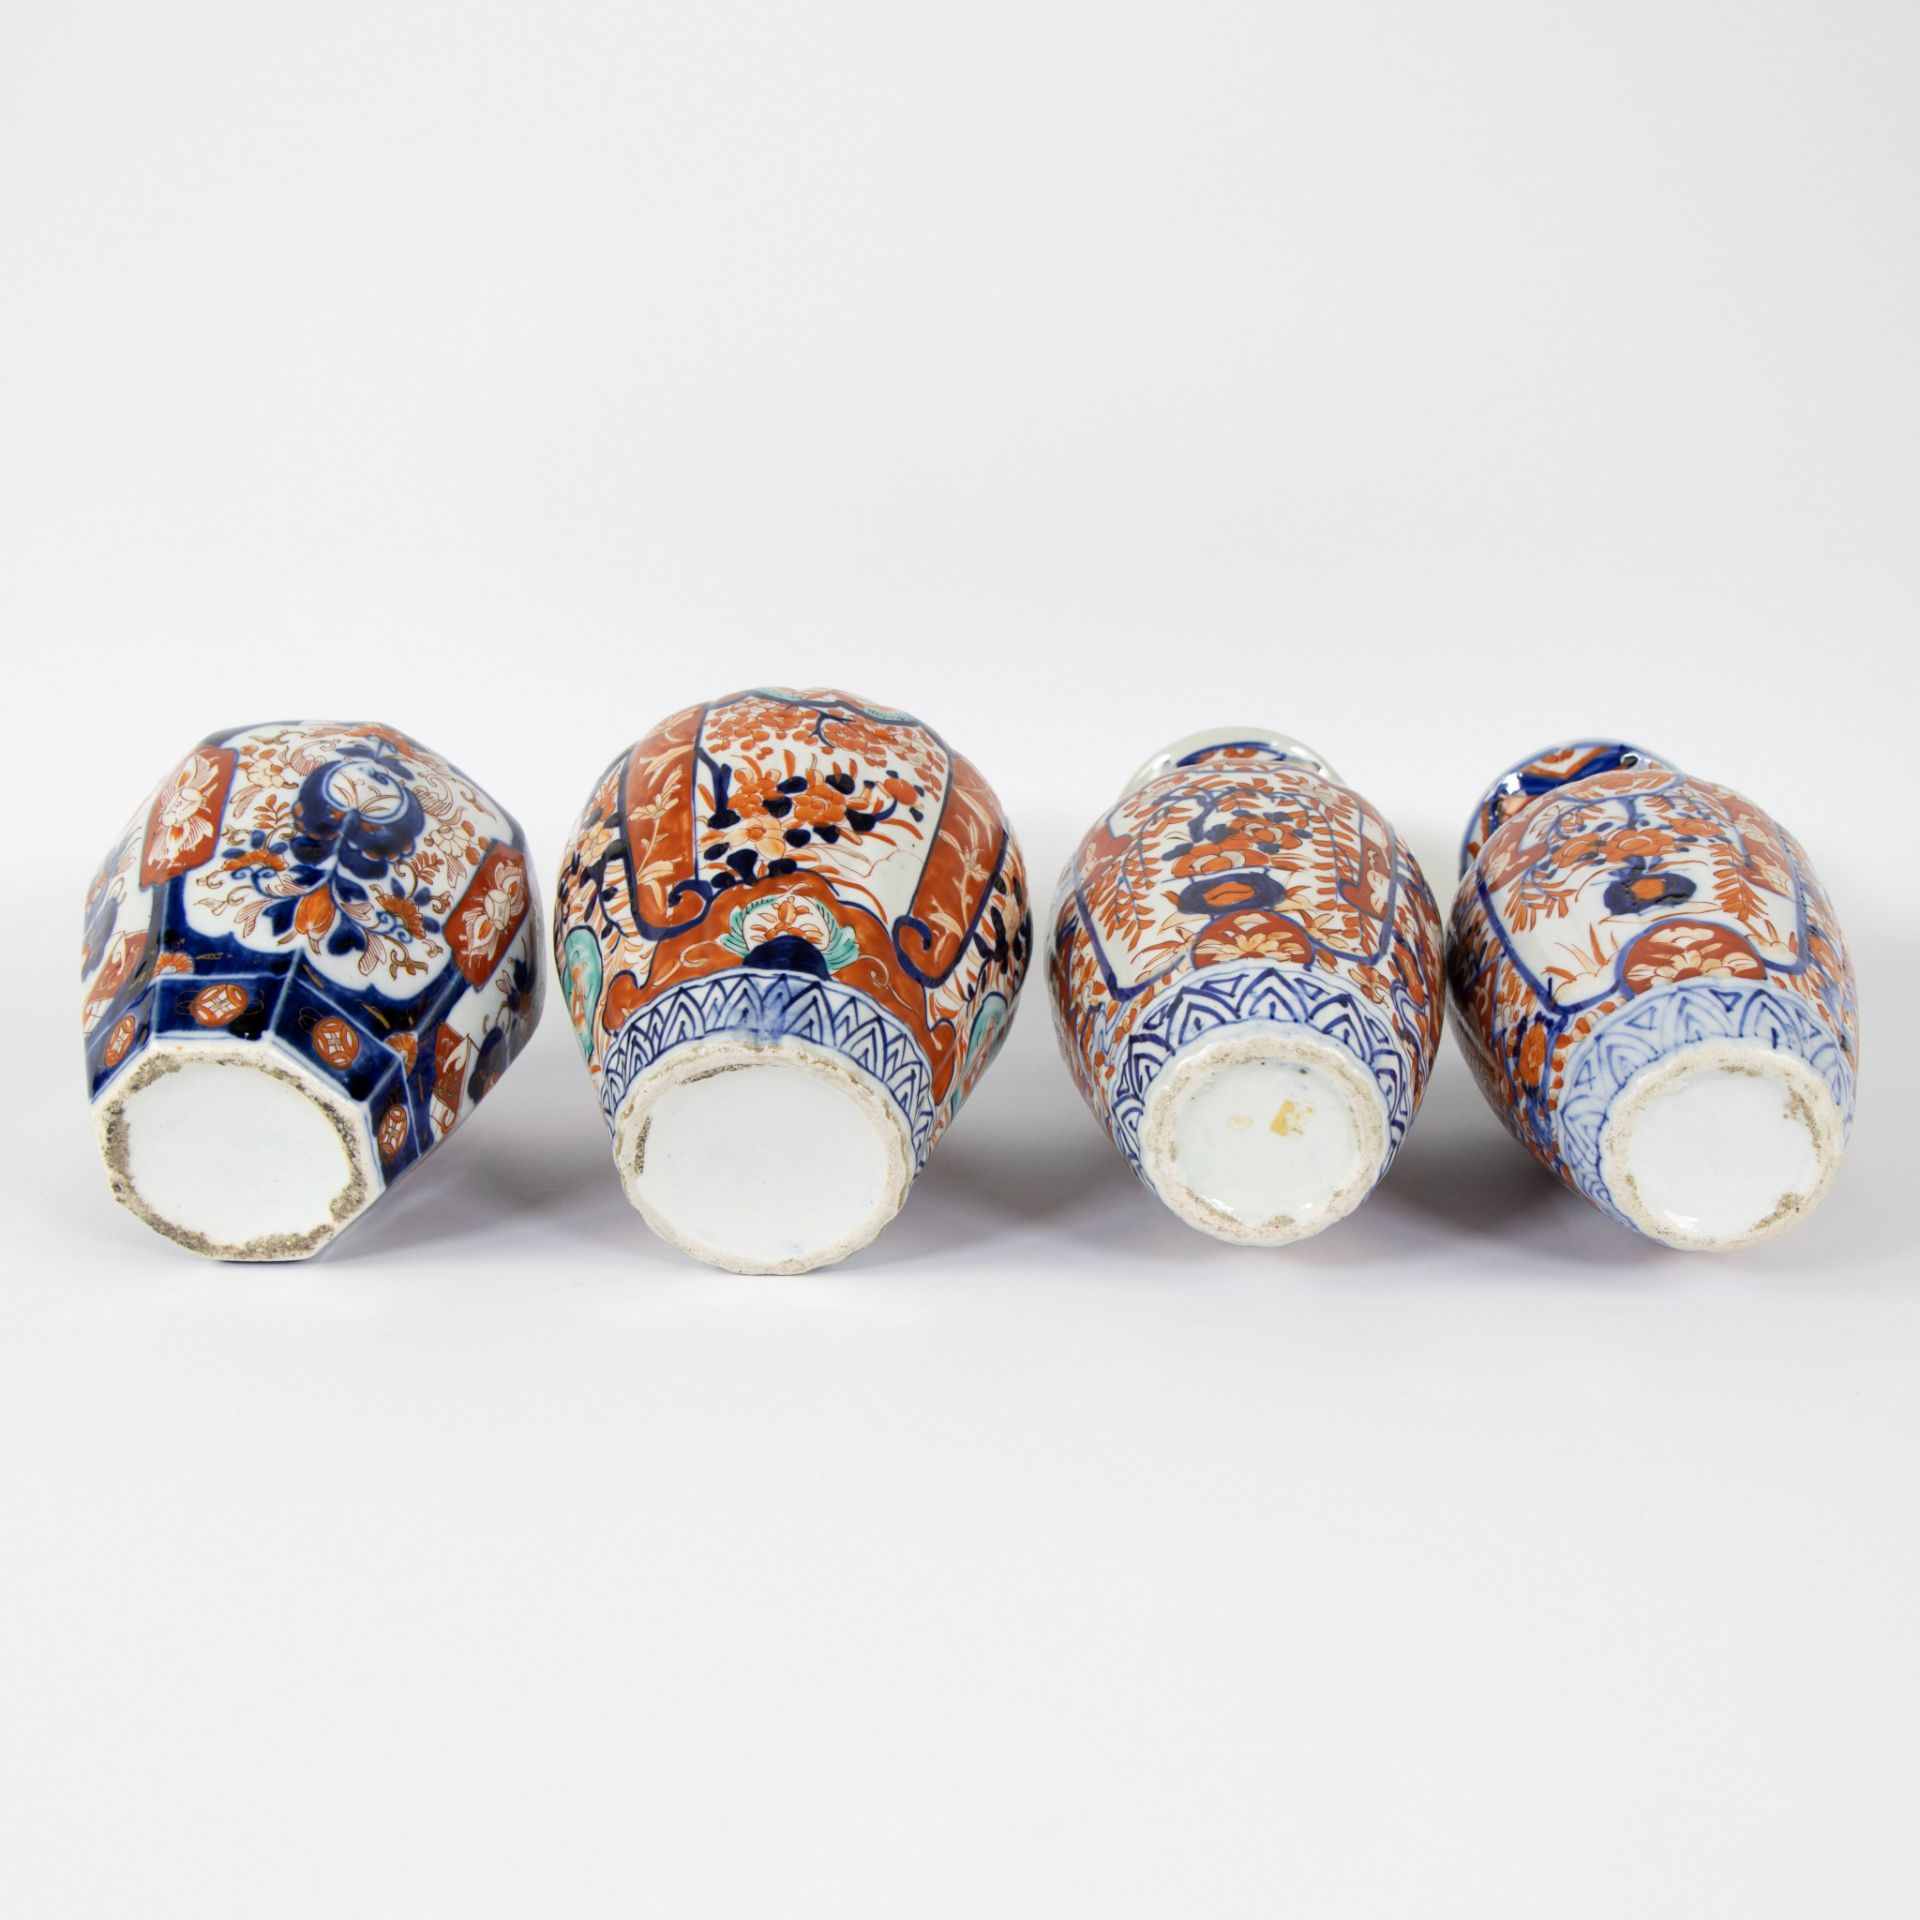 Pair of Japanese Imari vases and 2 lidded vases, 19th century - Image 6 of 6